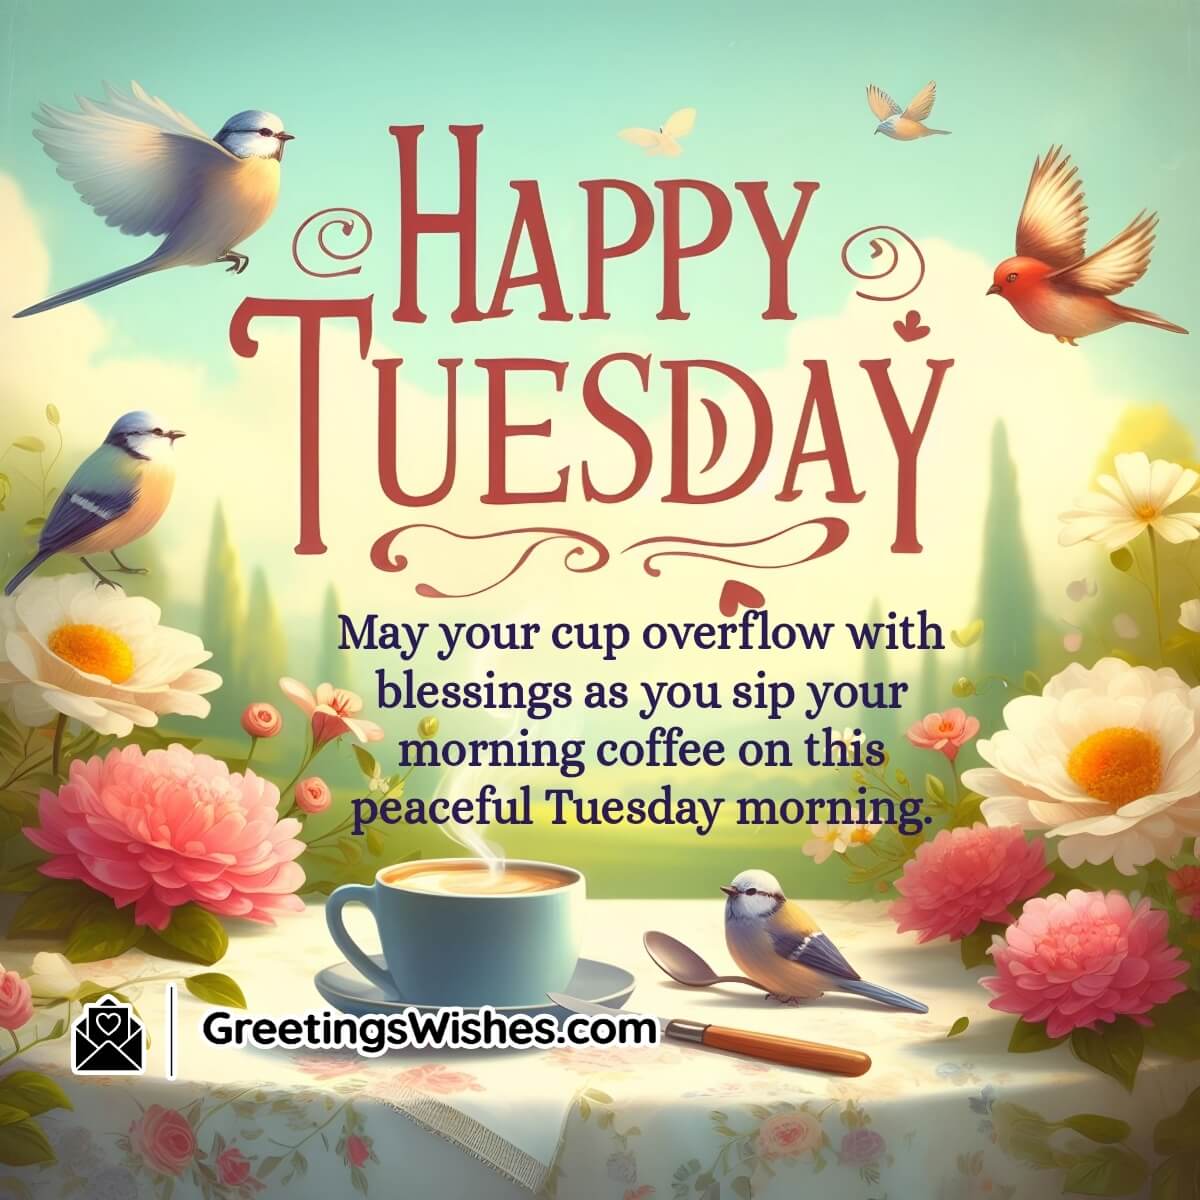 Happy Tuesday Morning Wishes